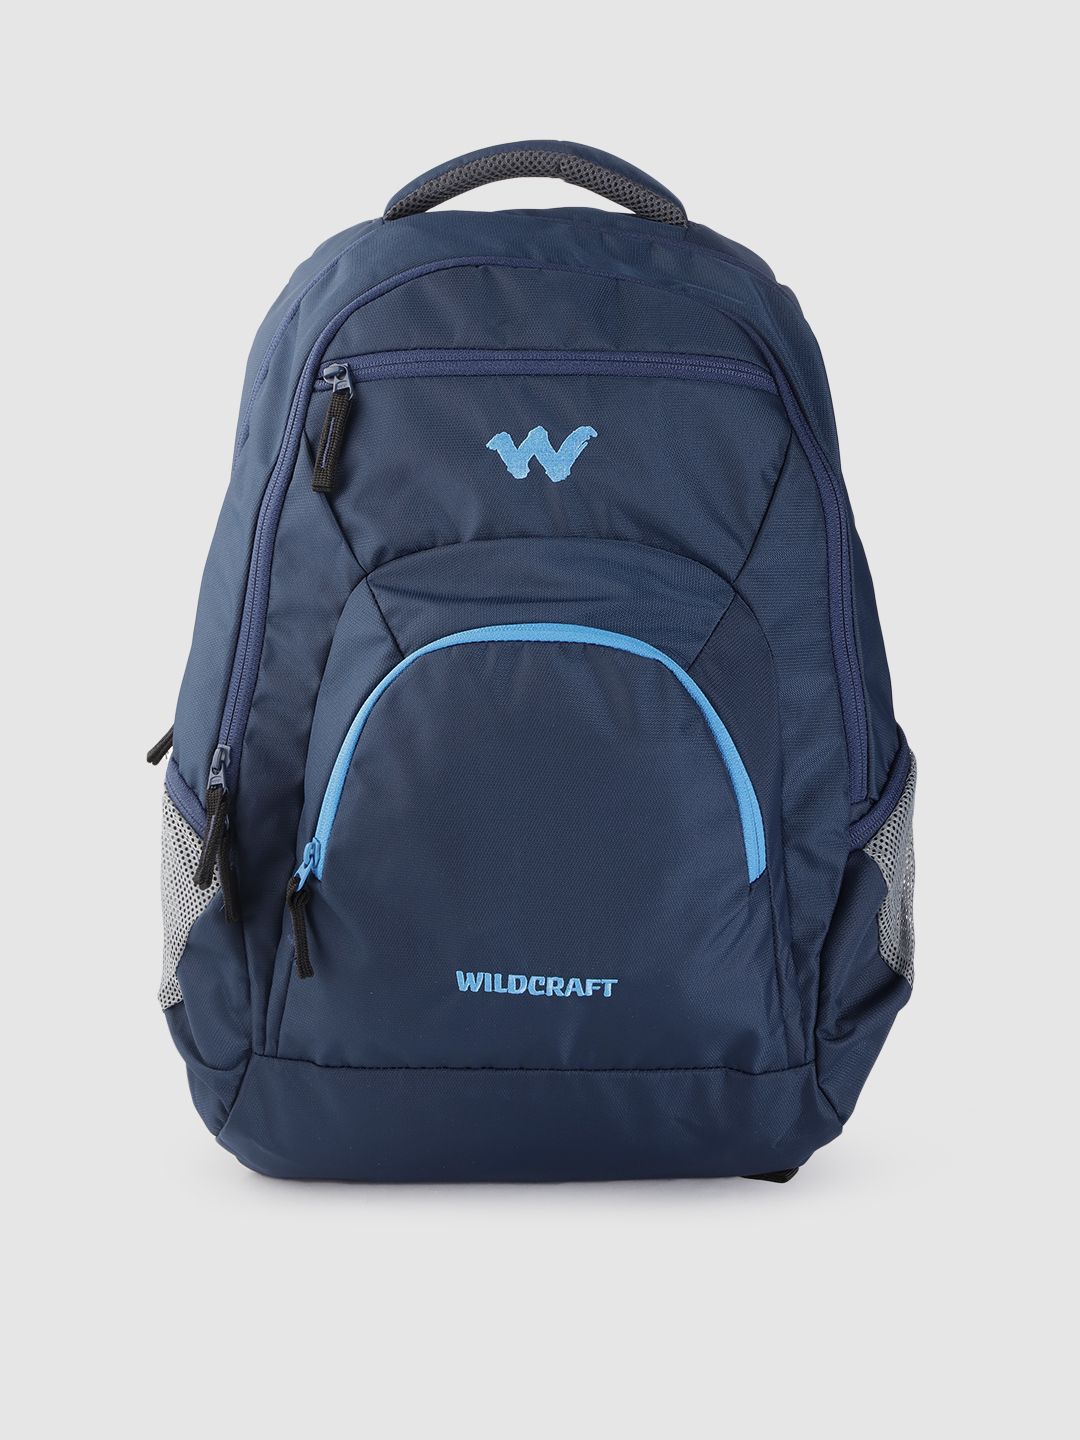 Wildcraft Unisex Blue 16 Inch Laptop Backpack Price in India